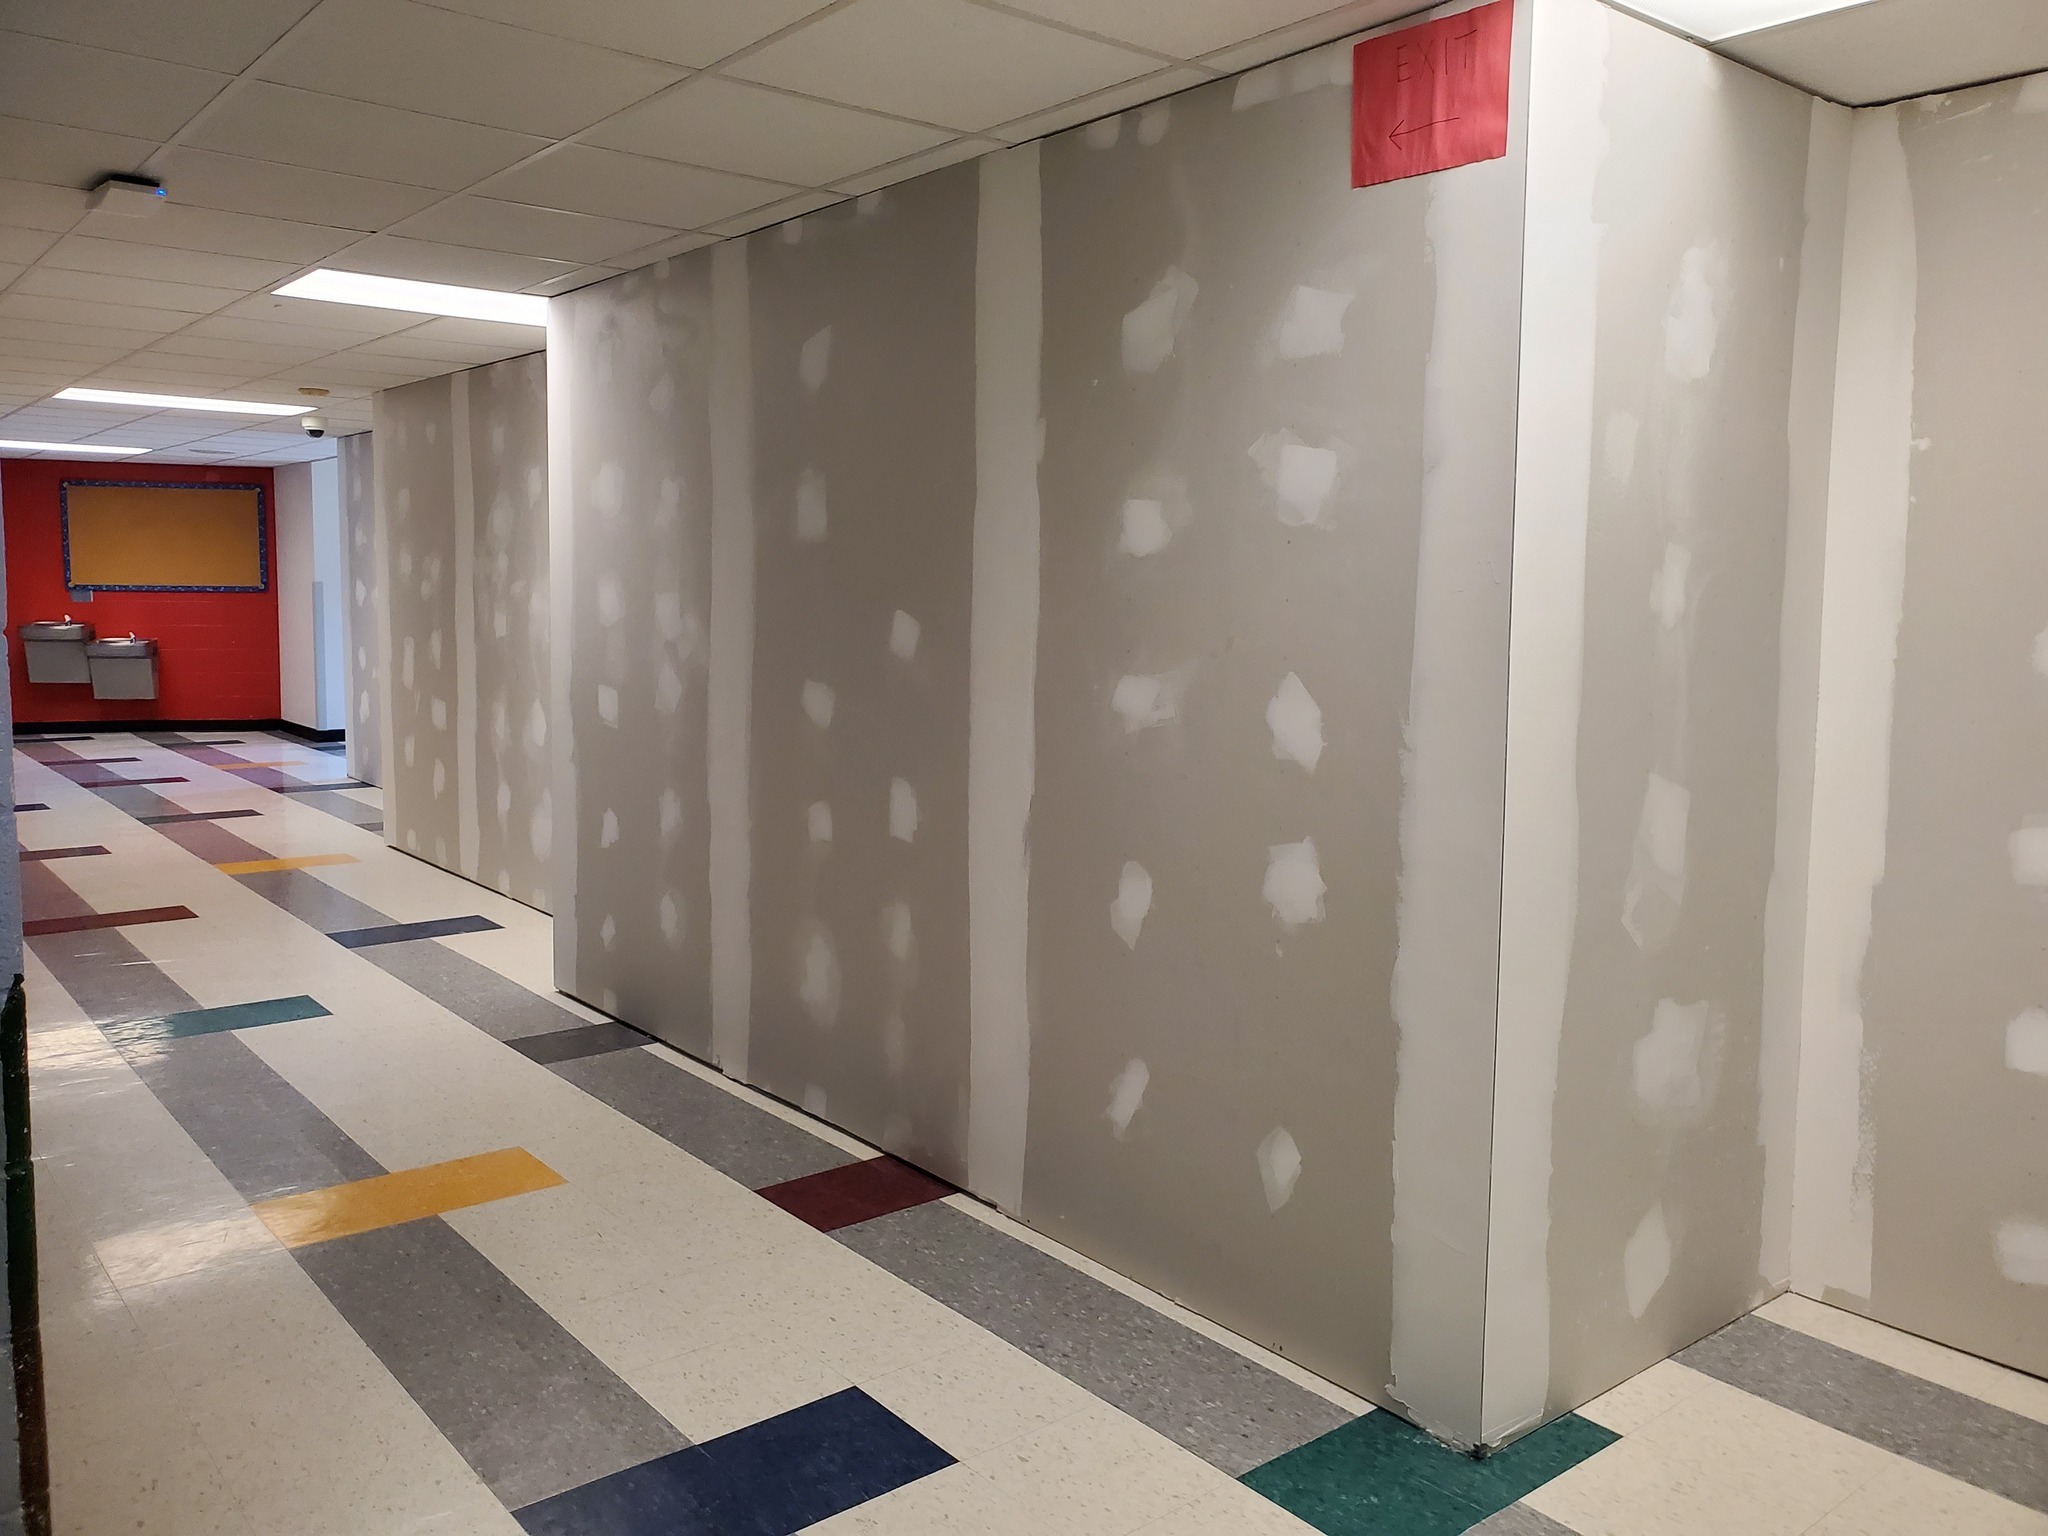 Temporary walls in the hallway